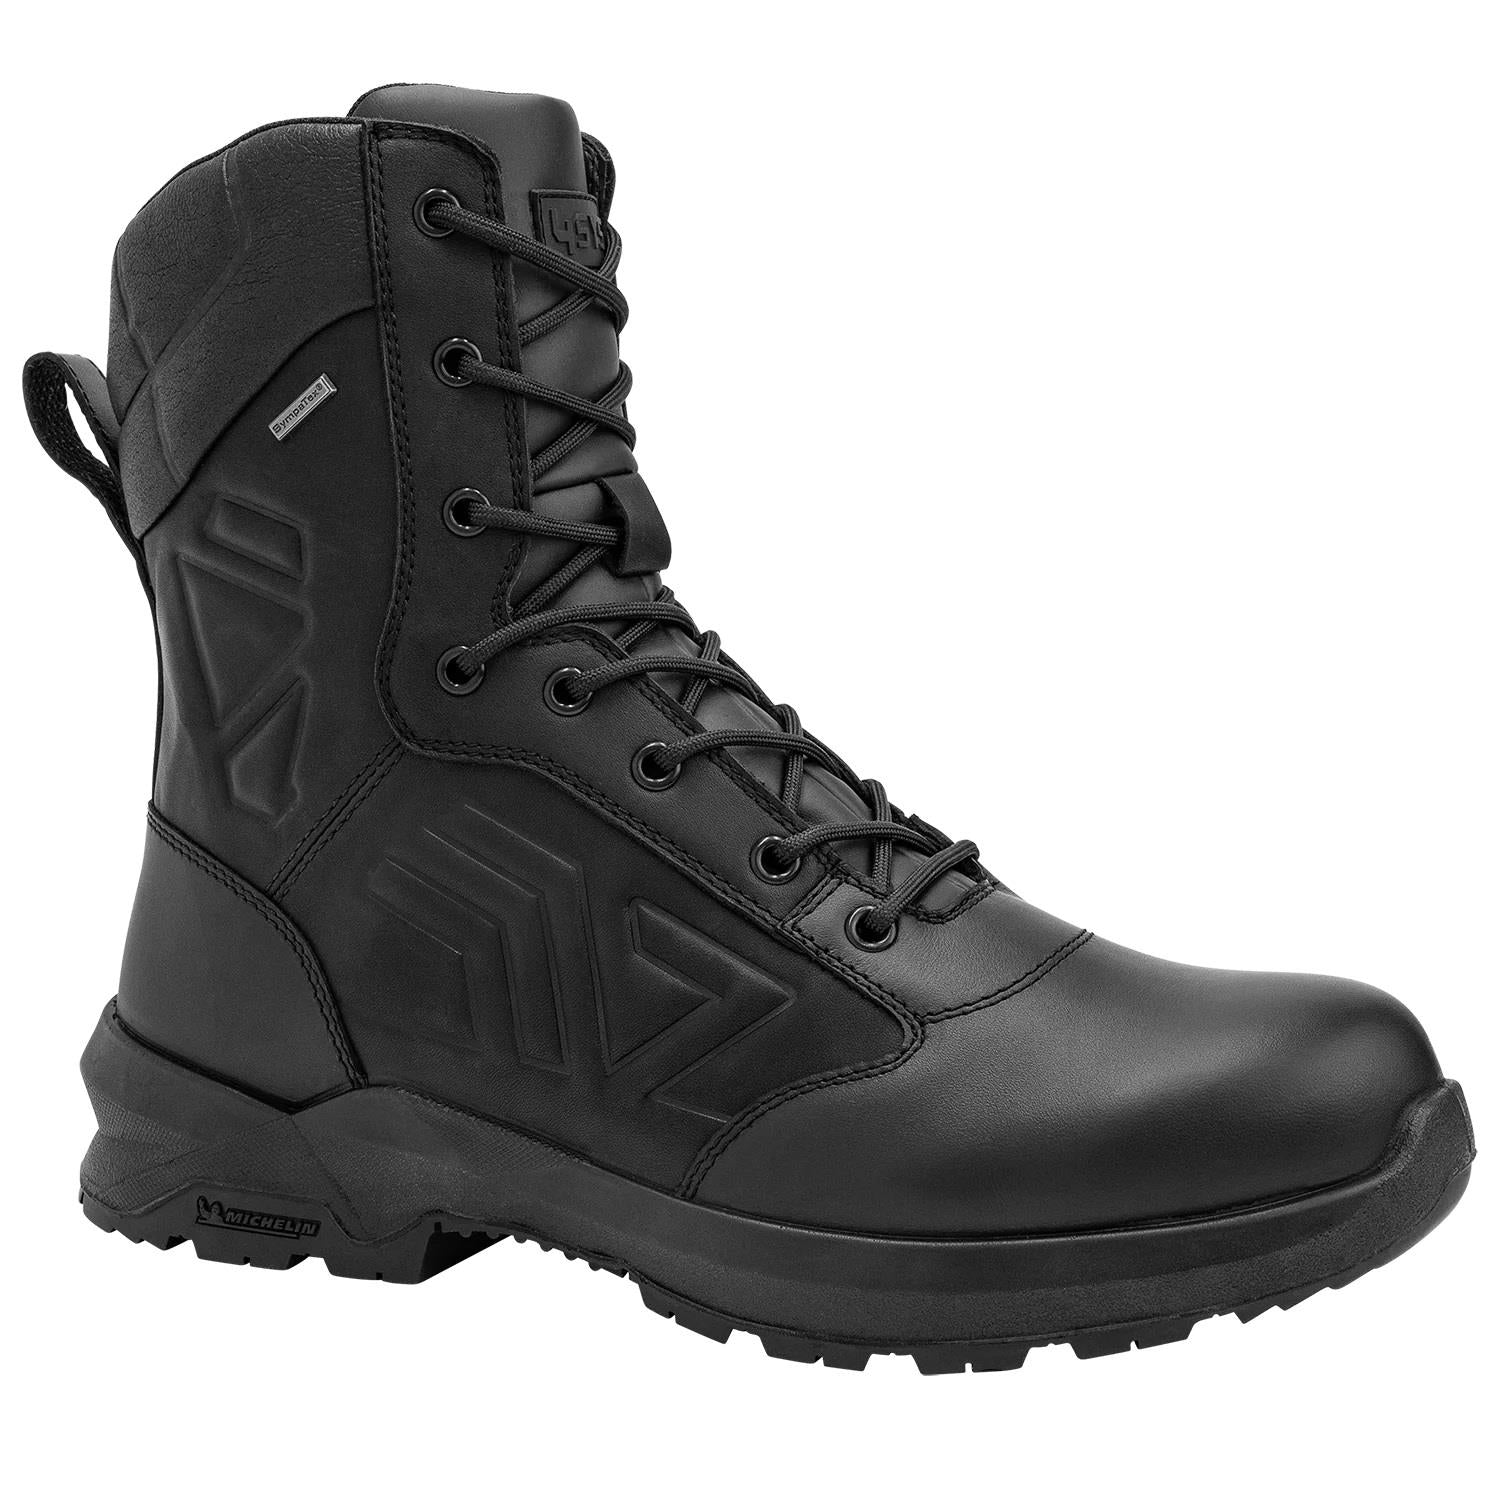 4SYS RADIAL 8.0 black leather/nylon scanner-safe waterproof combat patrol boot